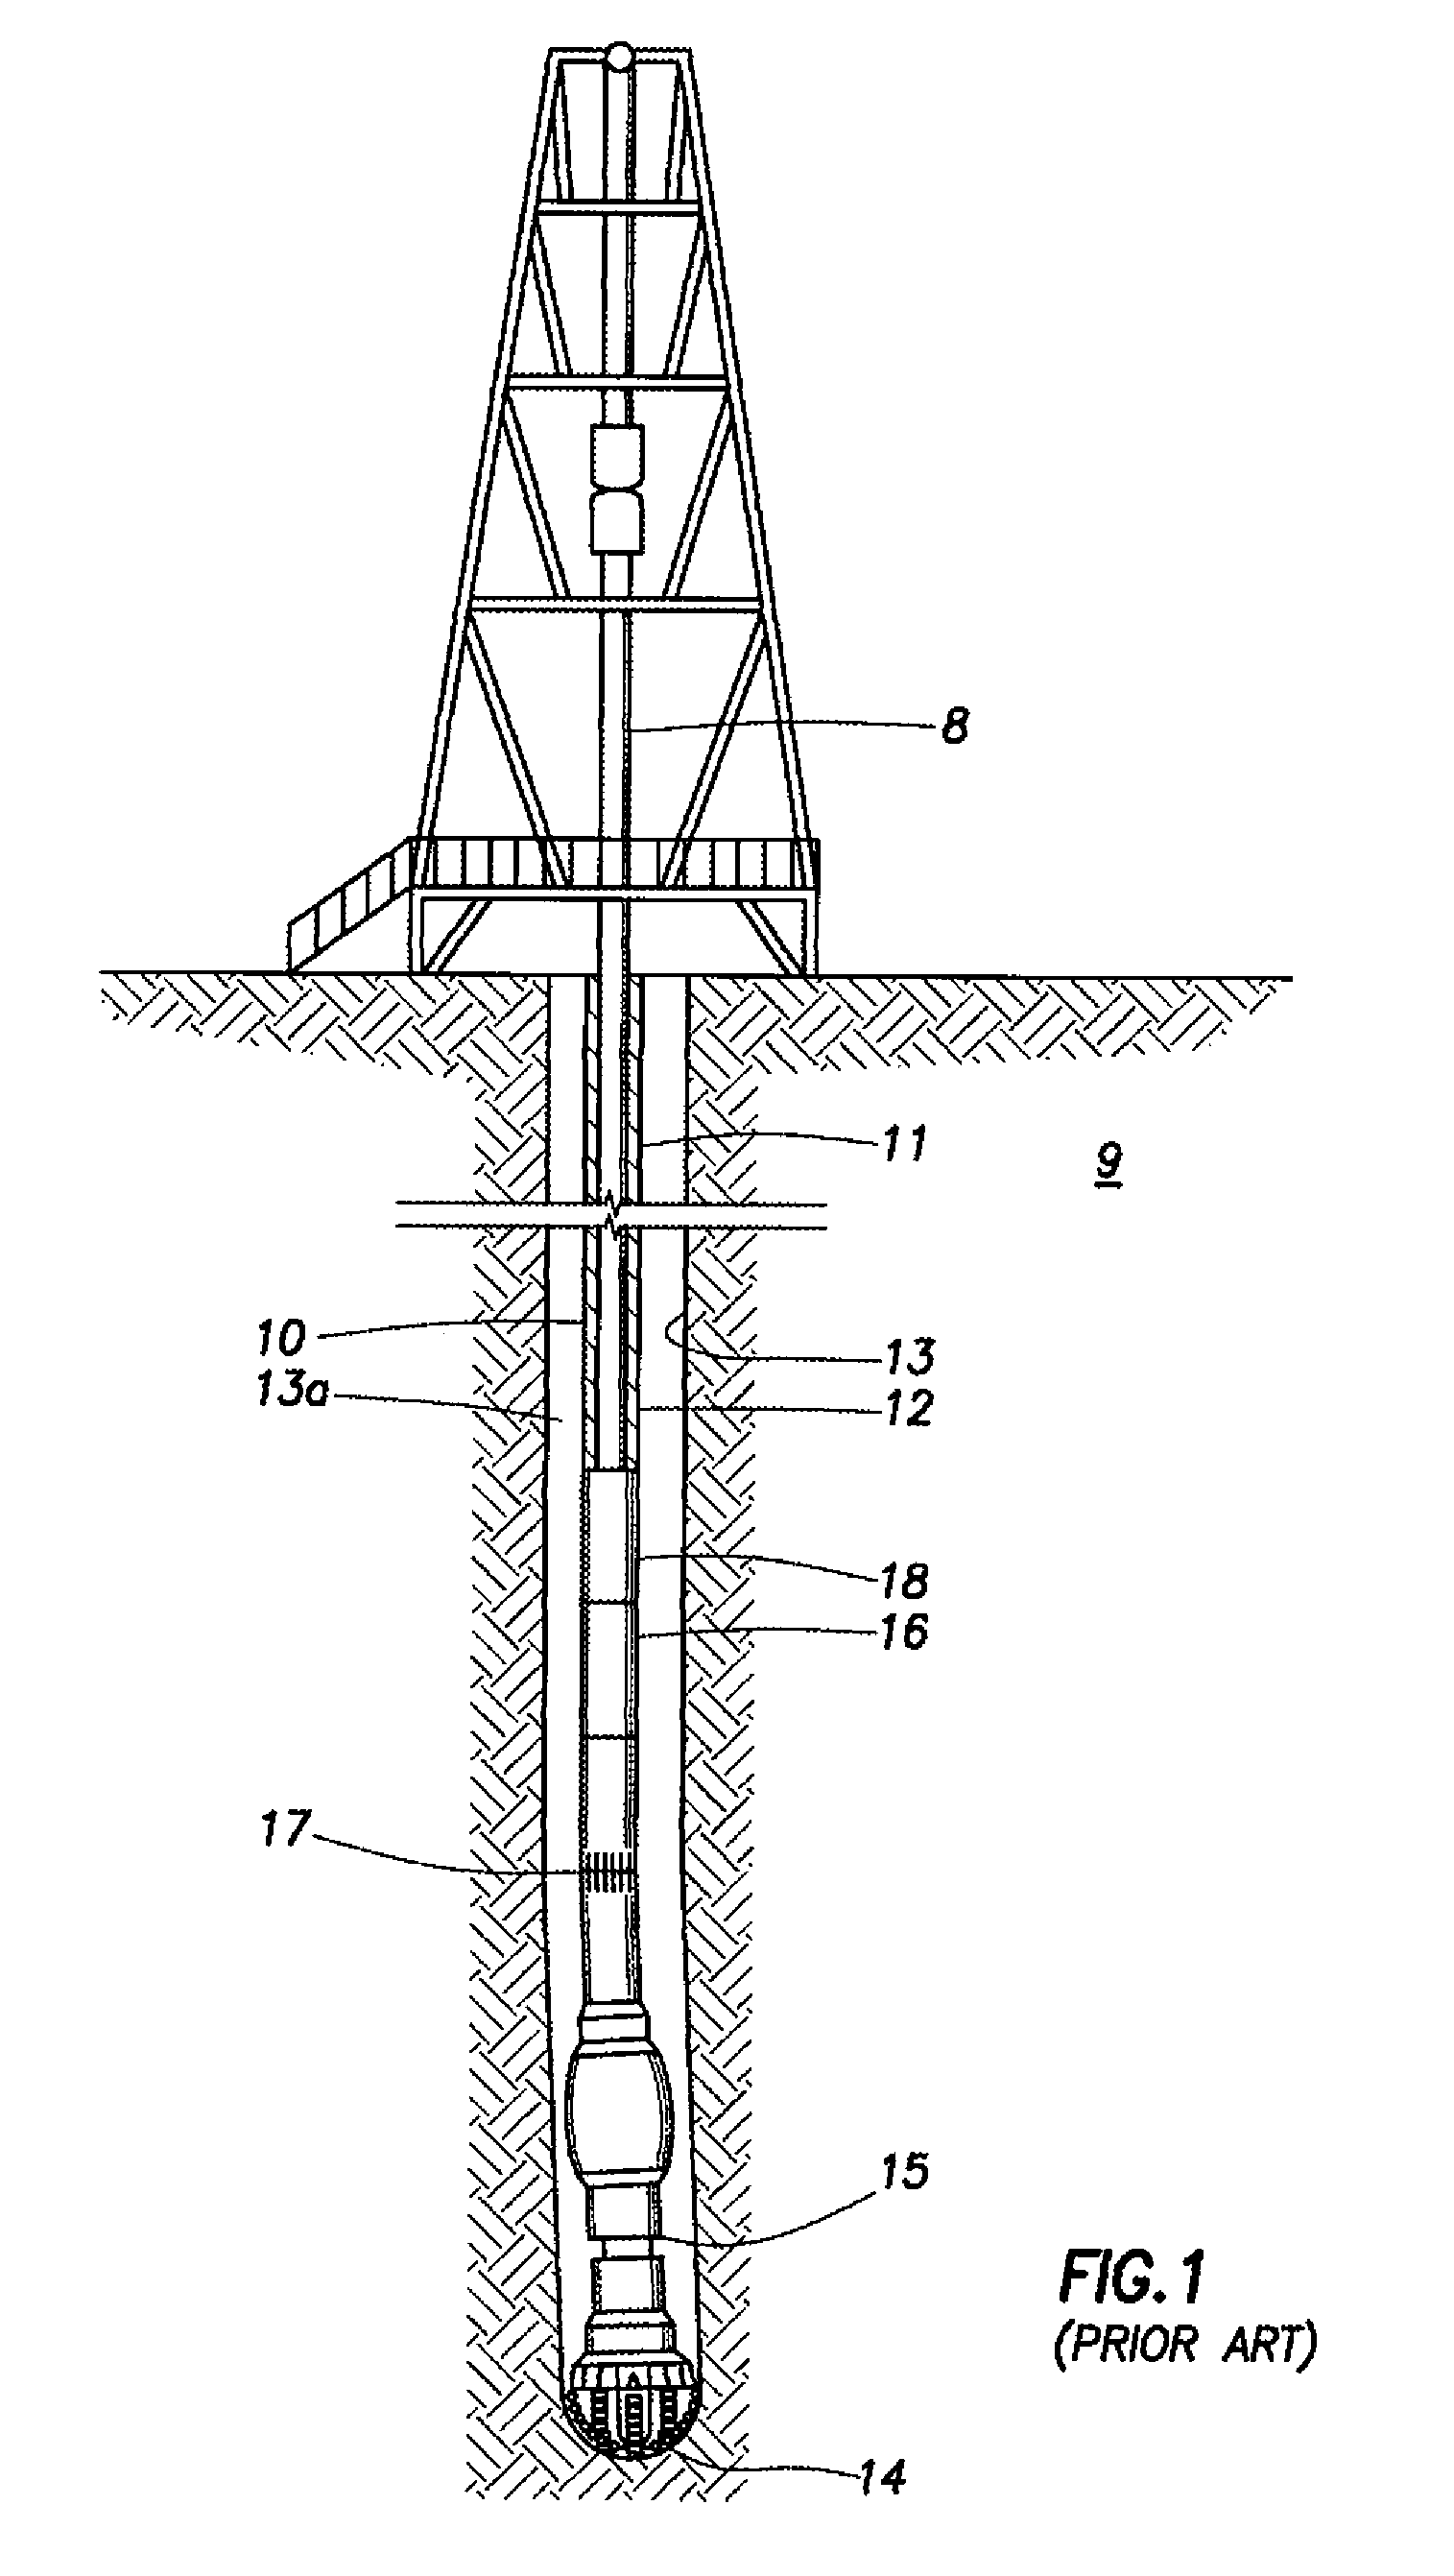 Apparatus and system for well placement and reservoir characterization